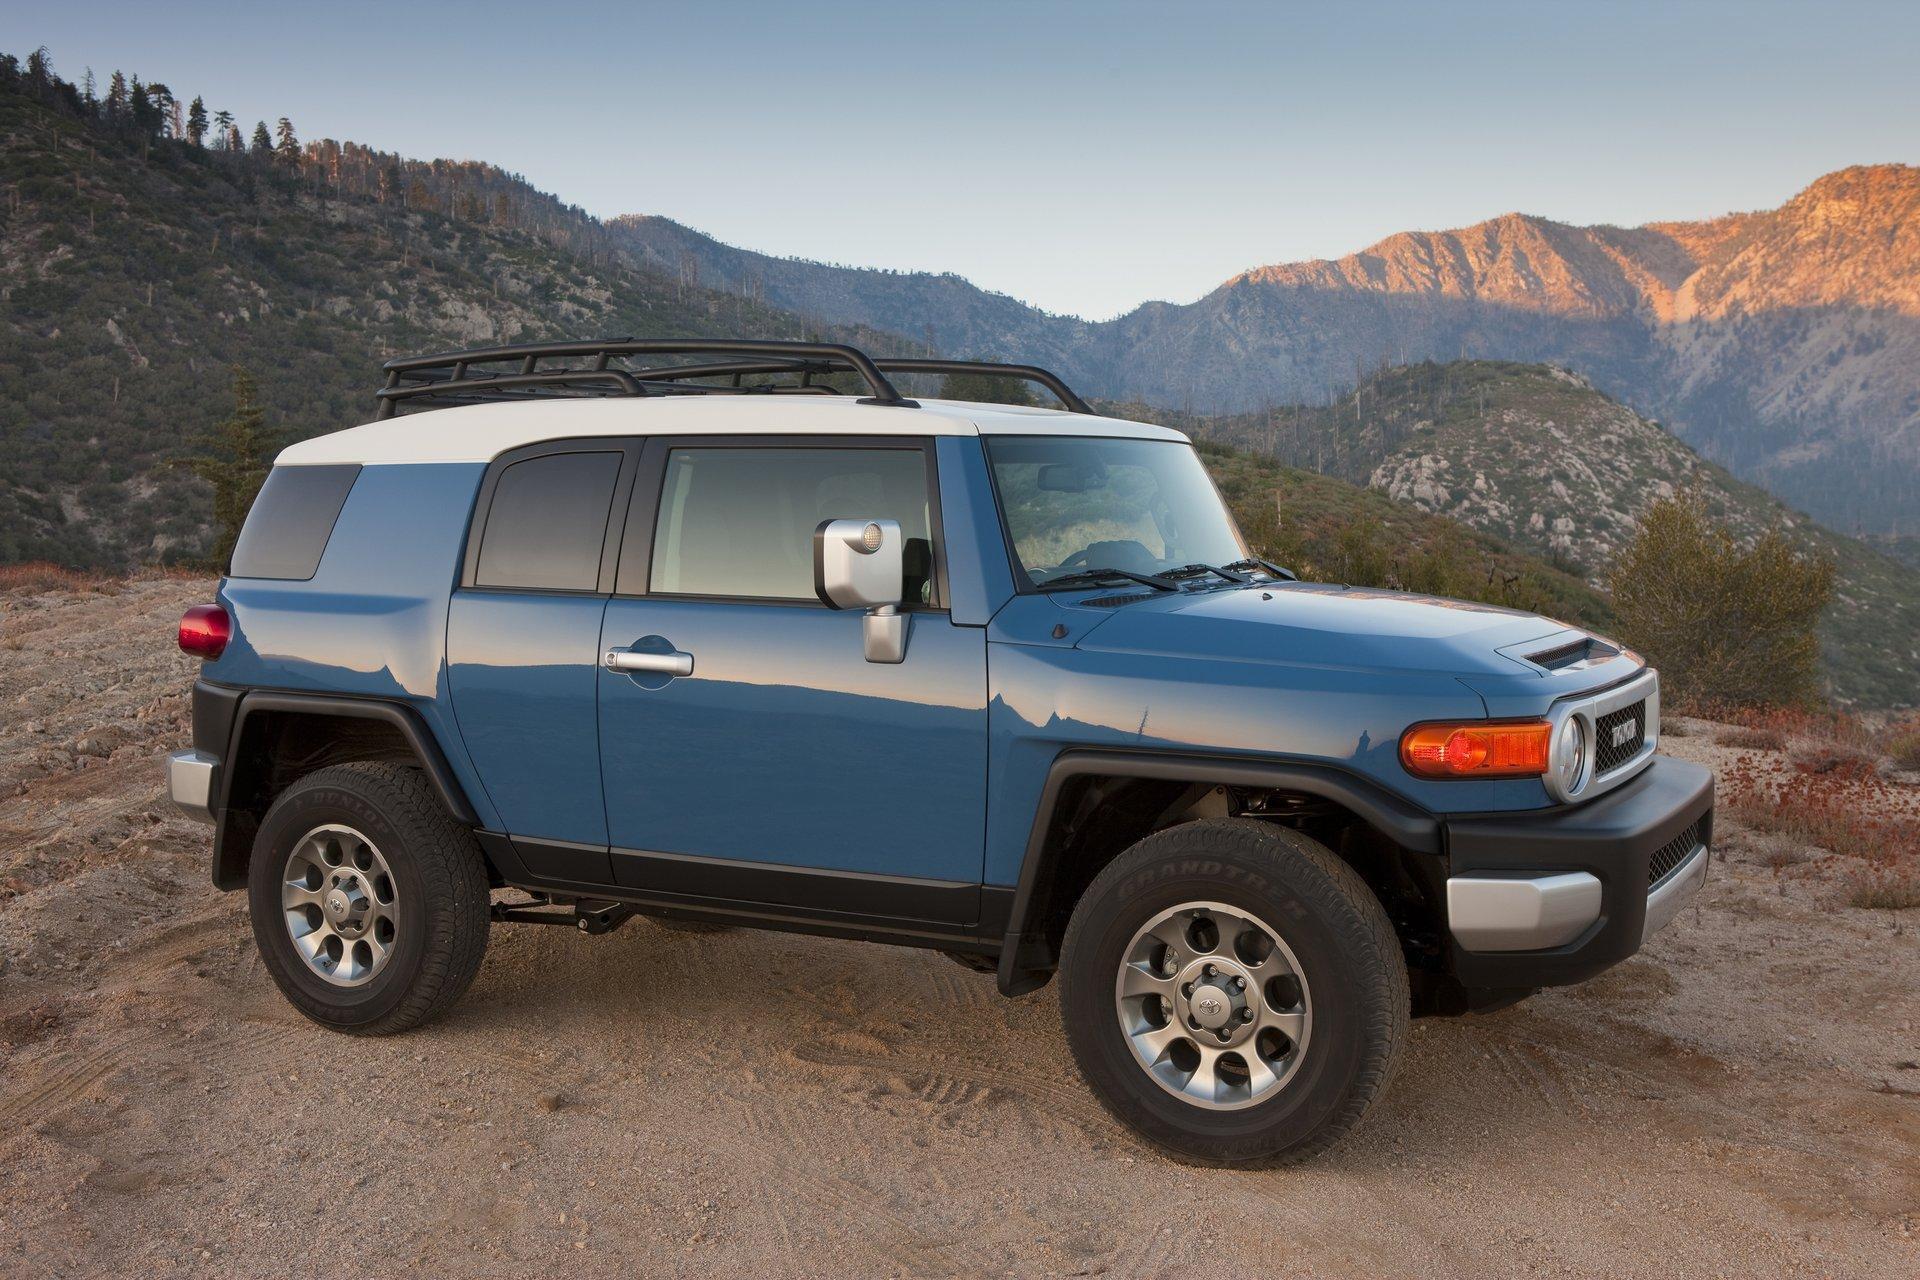 Car 2012 Toyota FJ Cruiser HD Wallpaper for iPhone, Android